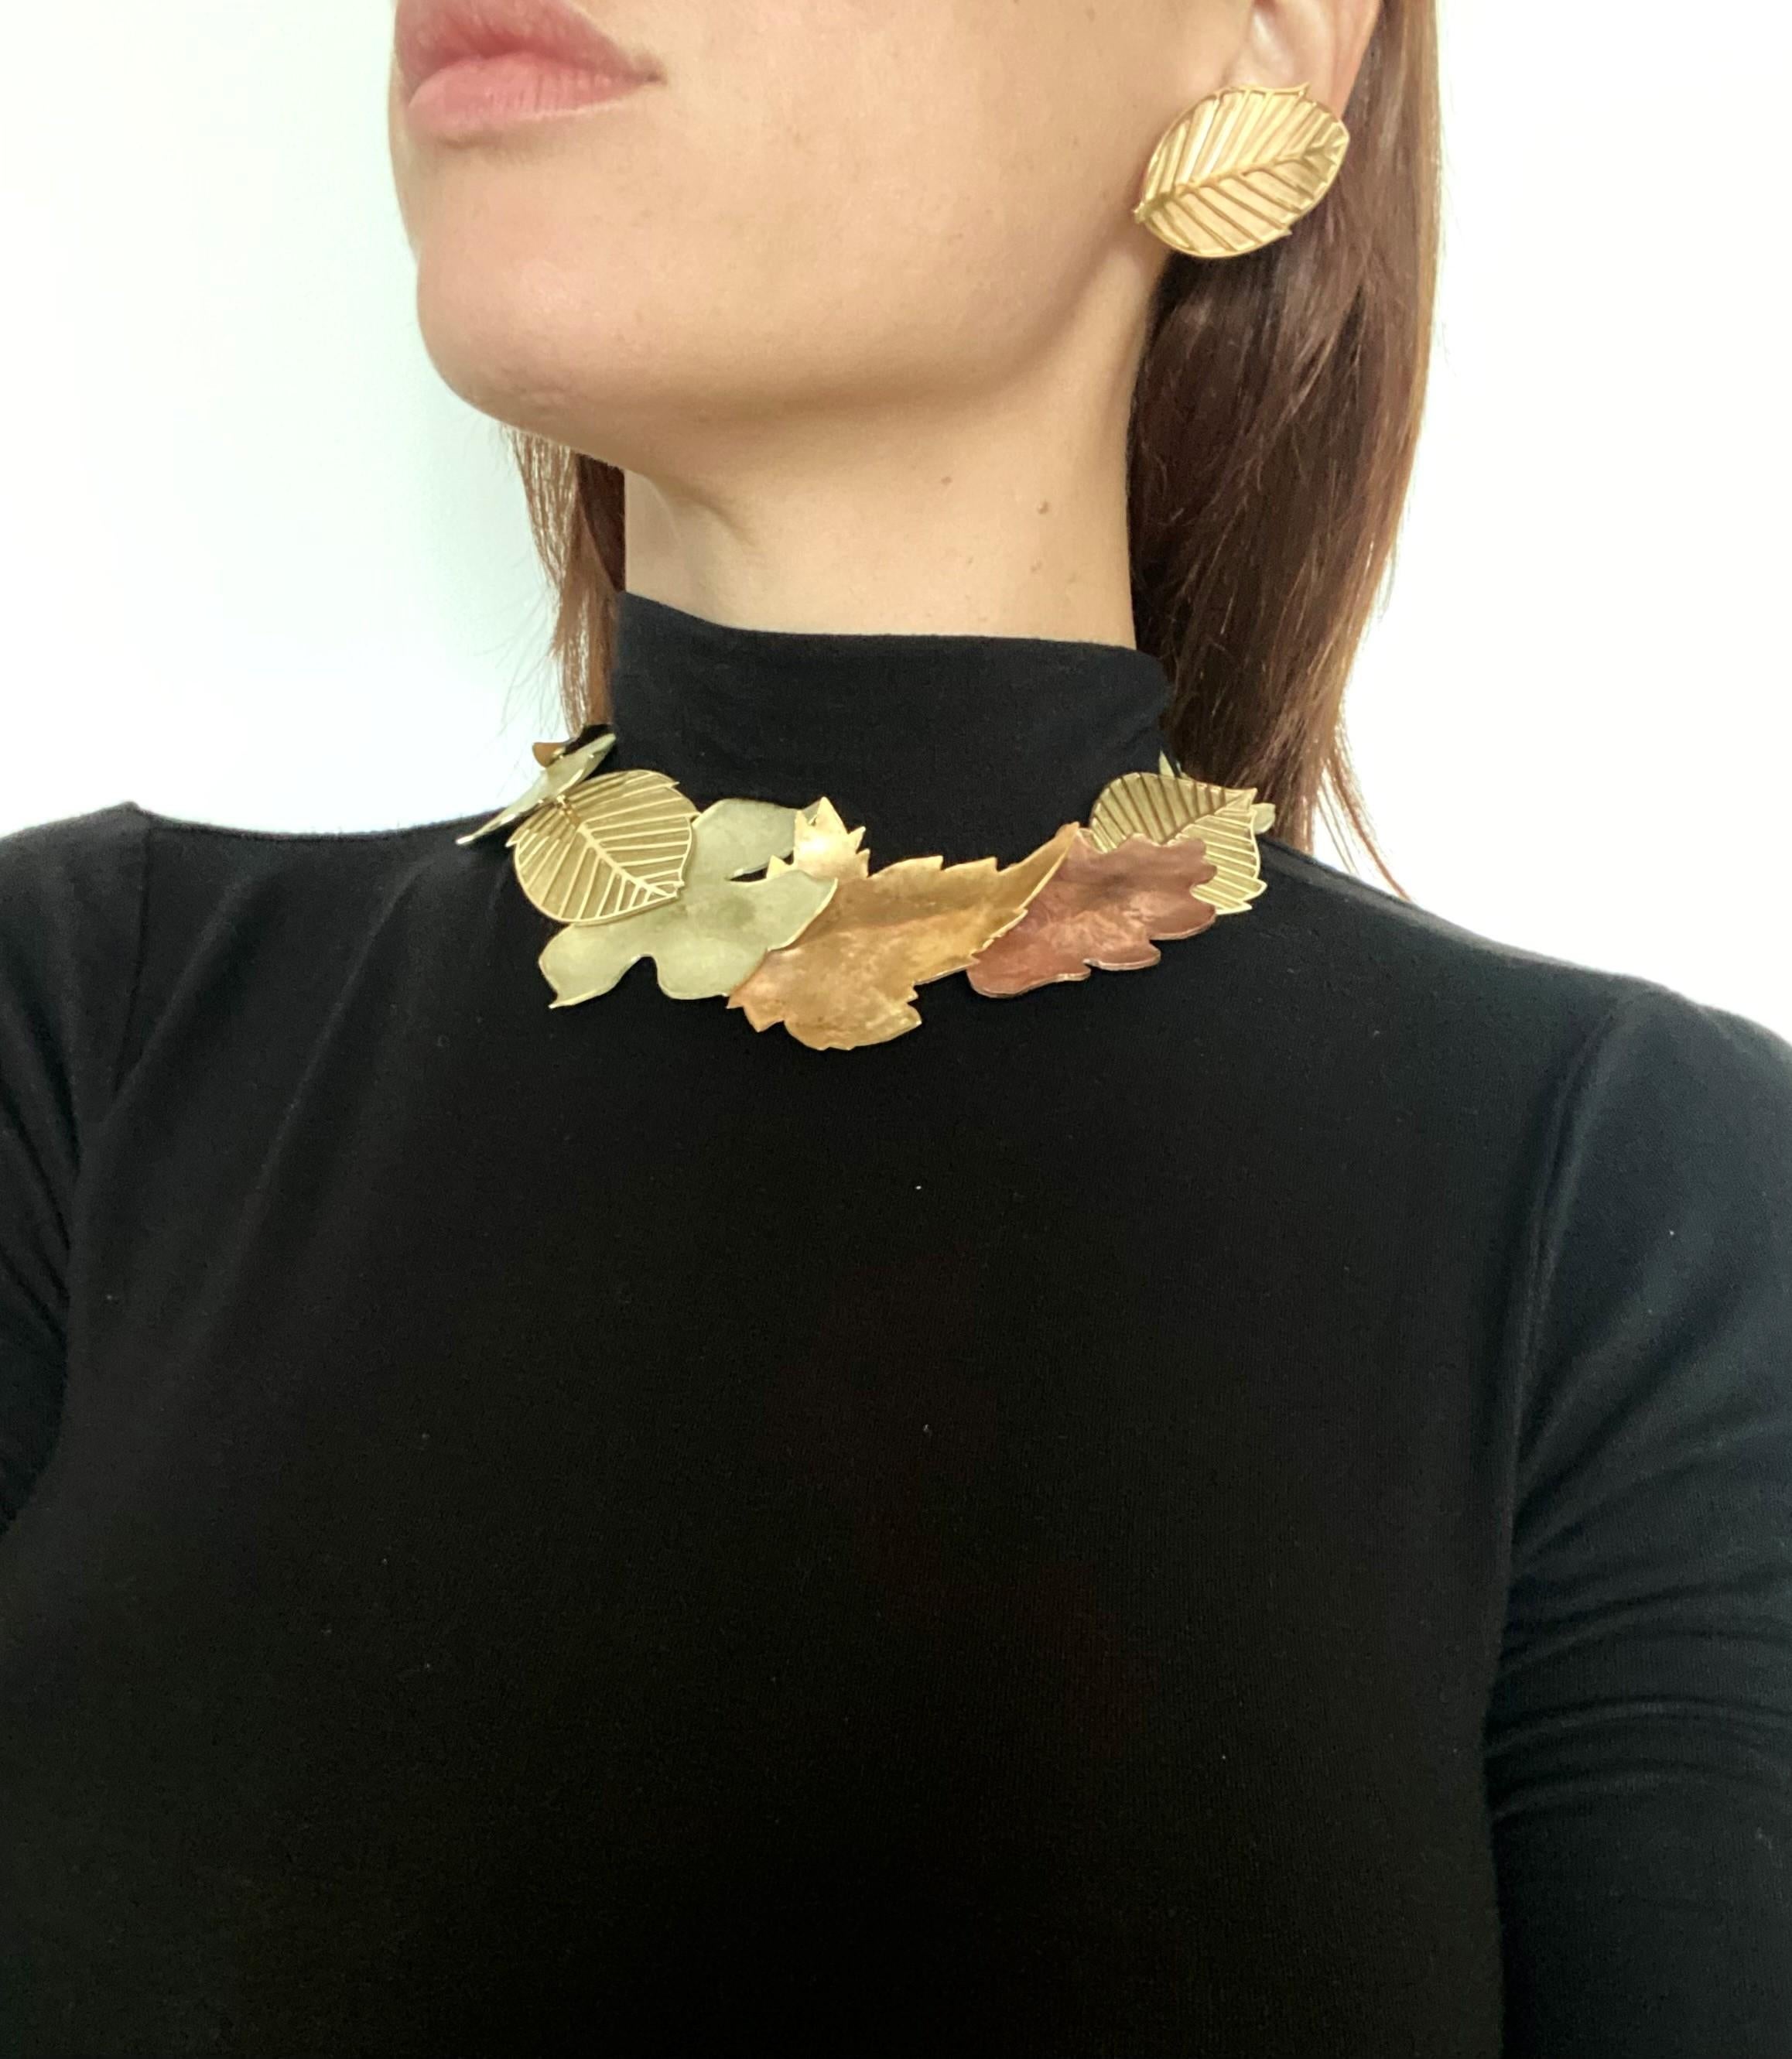 Leaves necklace earrings suite designed by Angela Cummings for Tiffany & Co.

An exceptional modernism jewelry suite comprising of a necklace and a pair of clips earrings created in New York city by Angela Cummings for Tiffany Studios, back in the